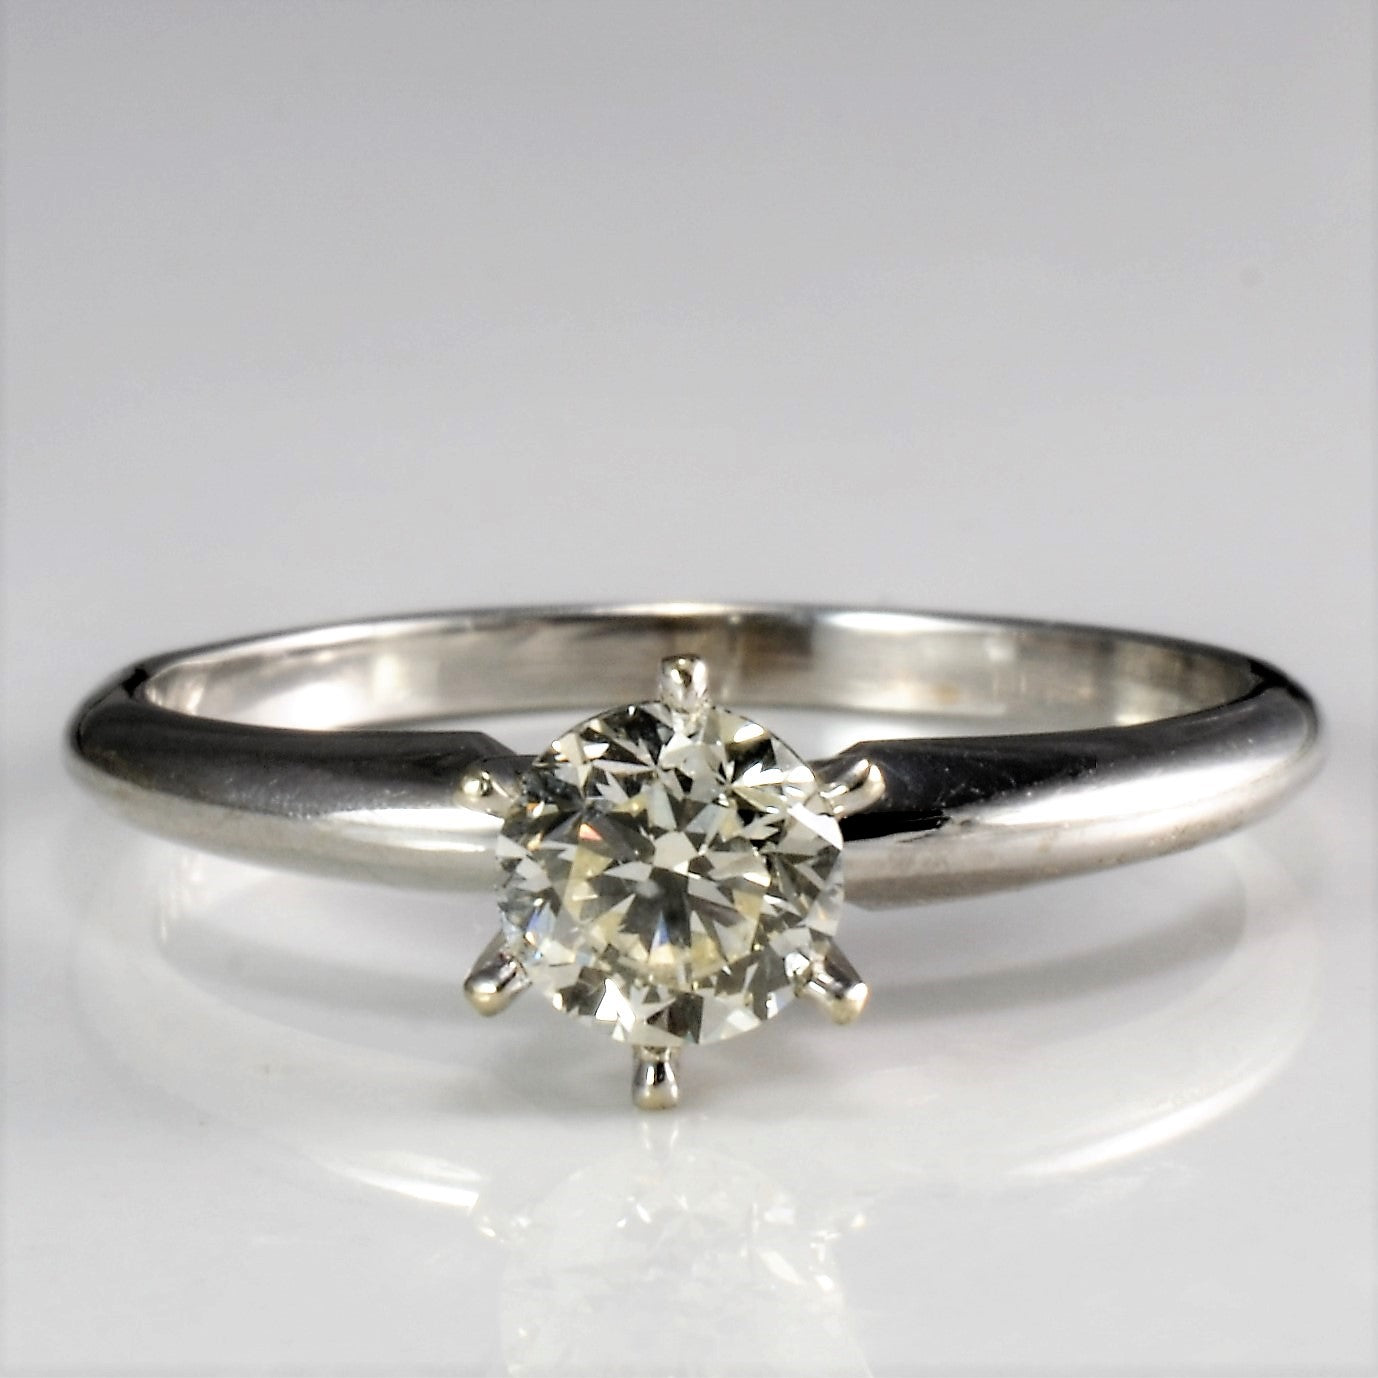 Six Prong Solitaire Diamond Ring | 0.39 ct, SZ 6 |